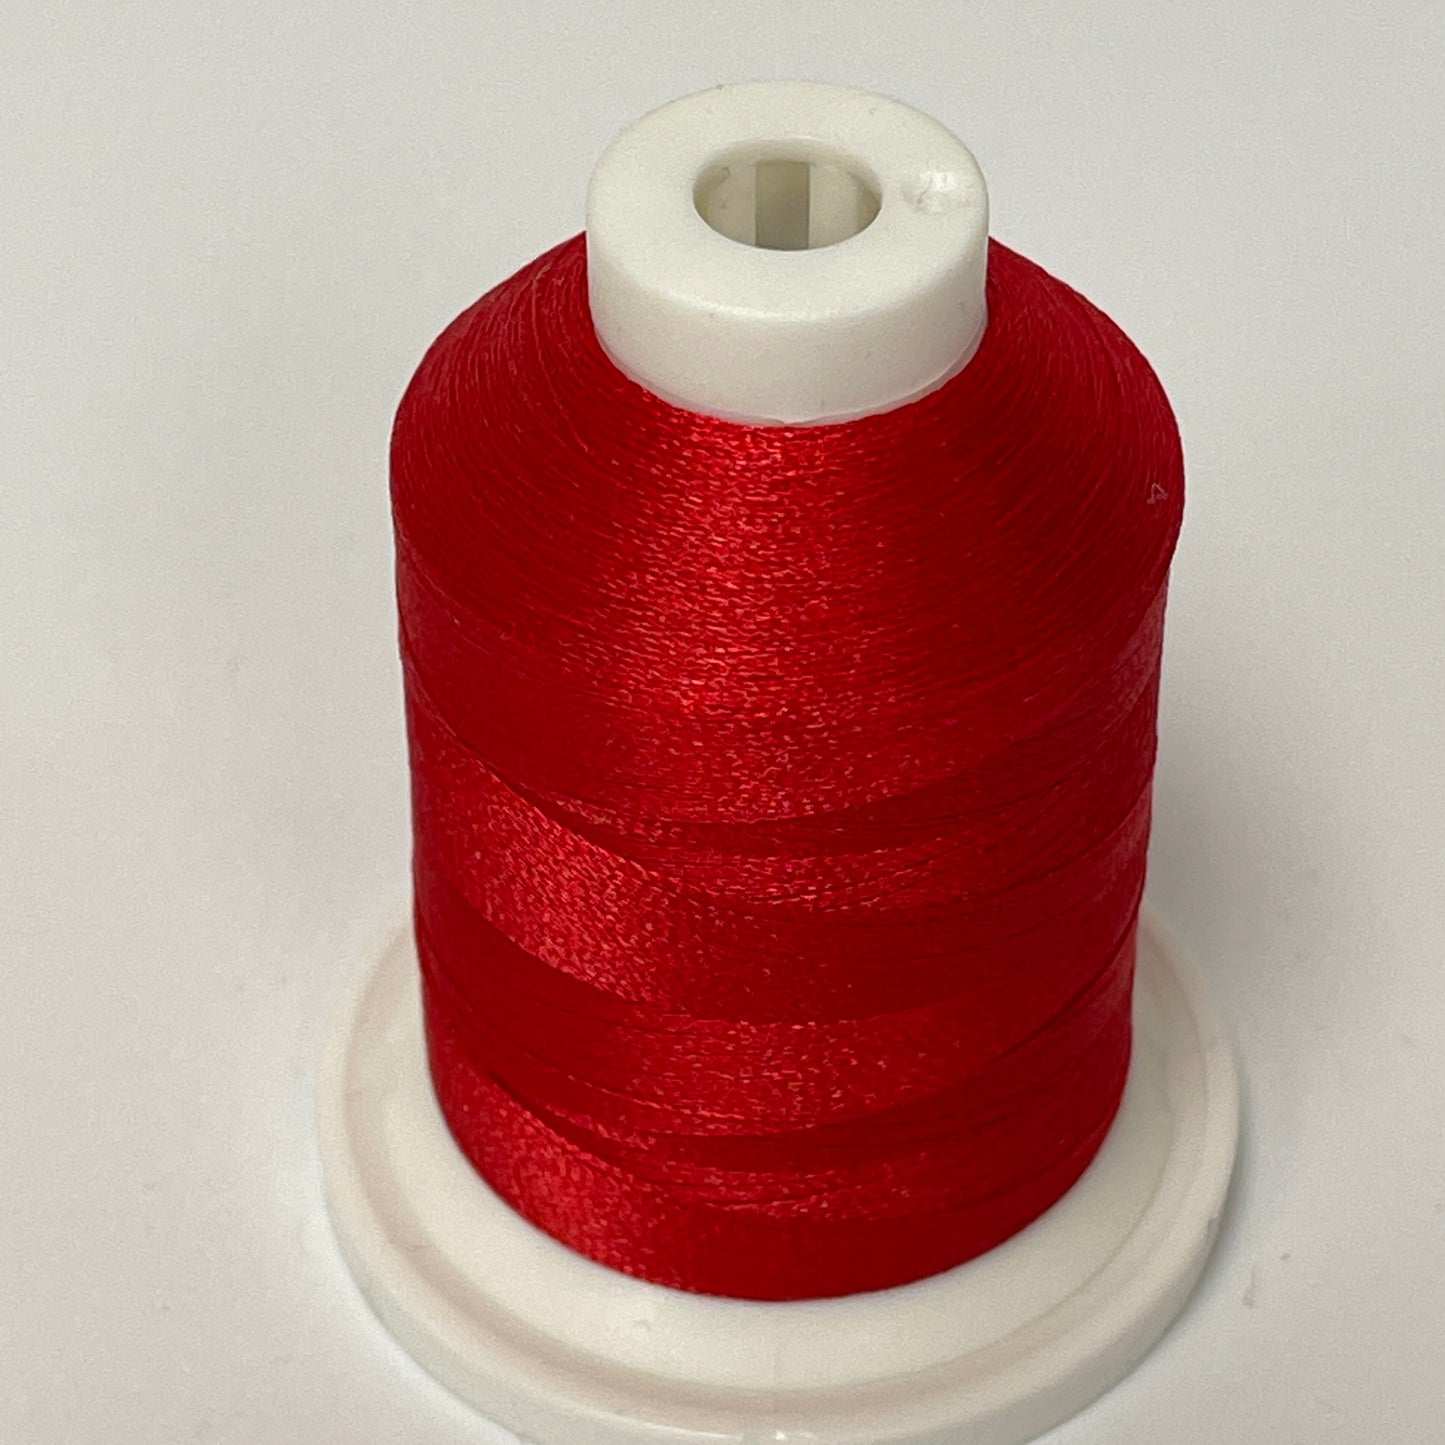 Brother Pacesetter Embroidery Thread - Reds/Pinks